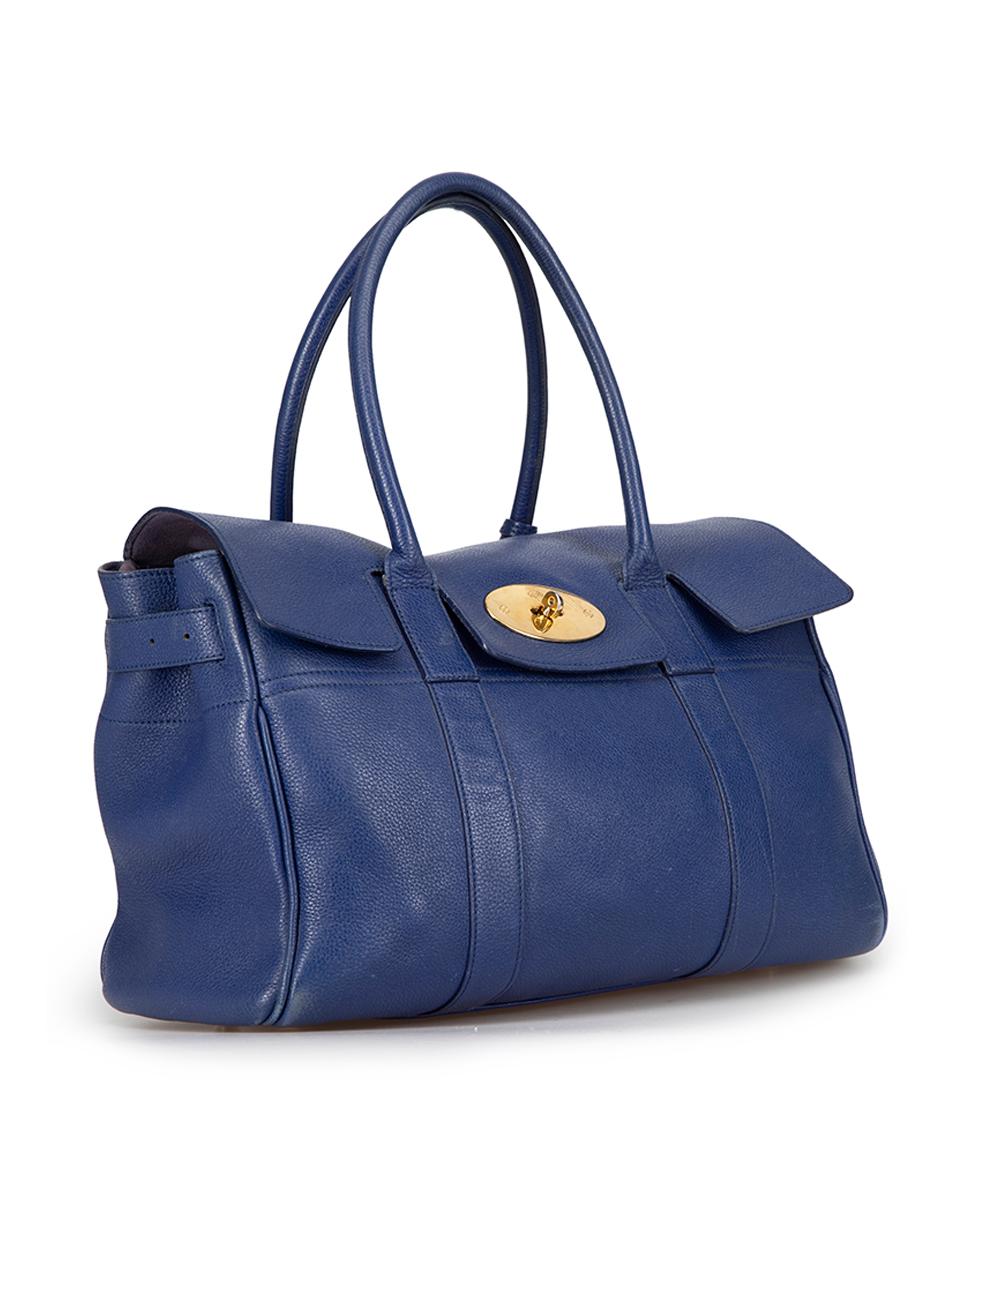 CONDITION is Good. Minor wear to bag is evident. Light wear to front, back handles, tag and lining with scuff marks on this used Mulberry designer resale item. 



Details


Cobalt Blue

Leather

Large tote bag

2x Rolled top handles

Turnlock